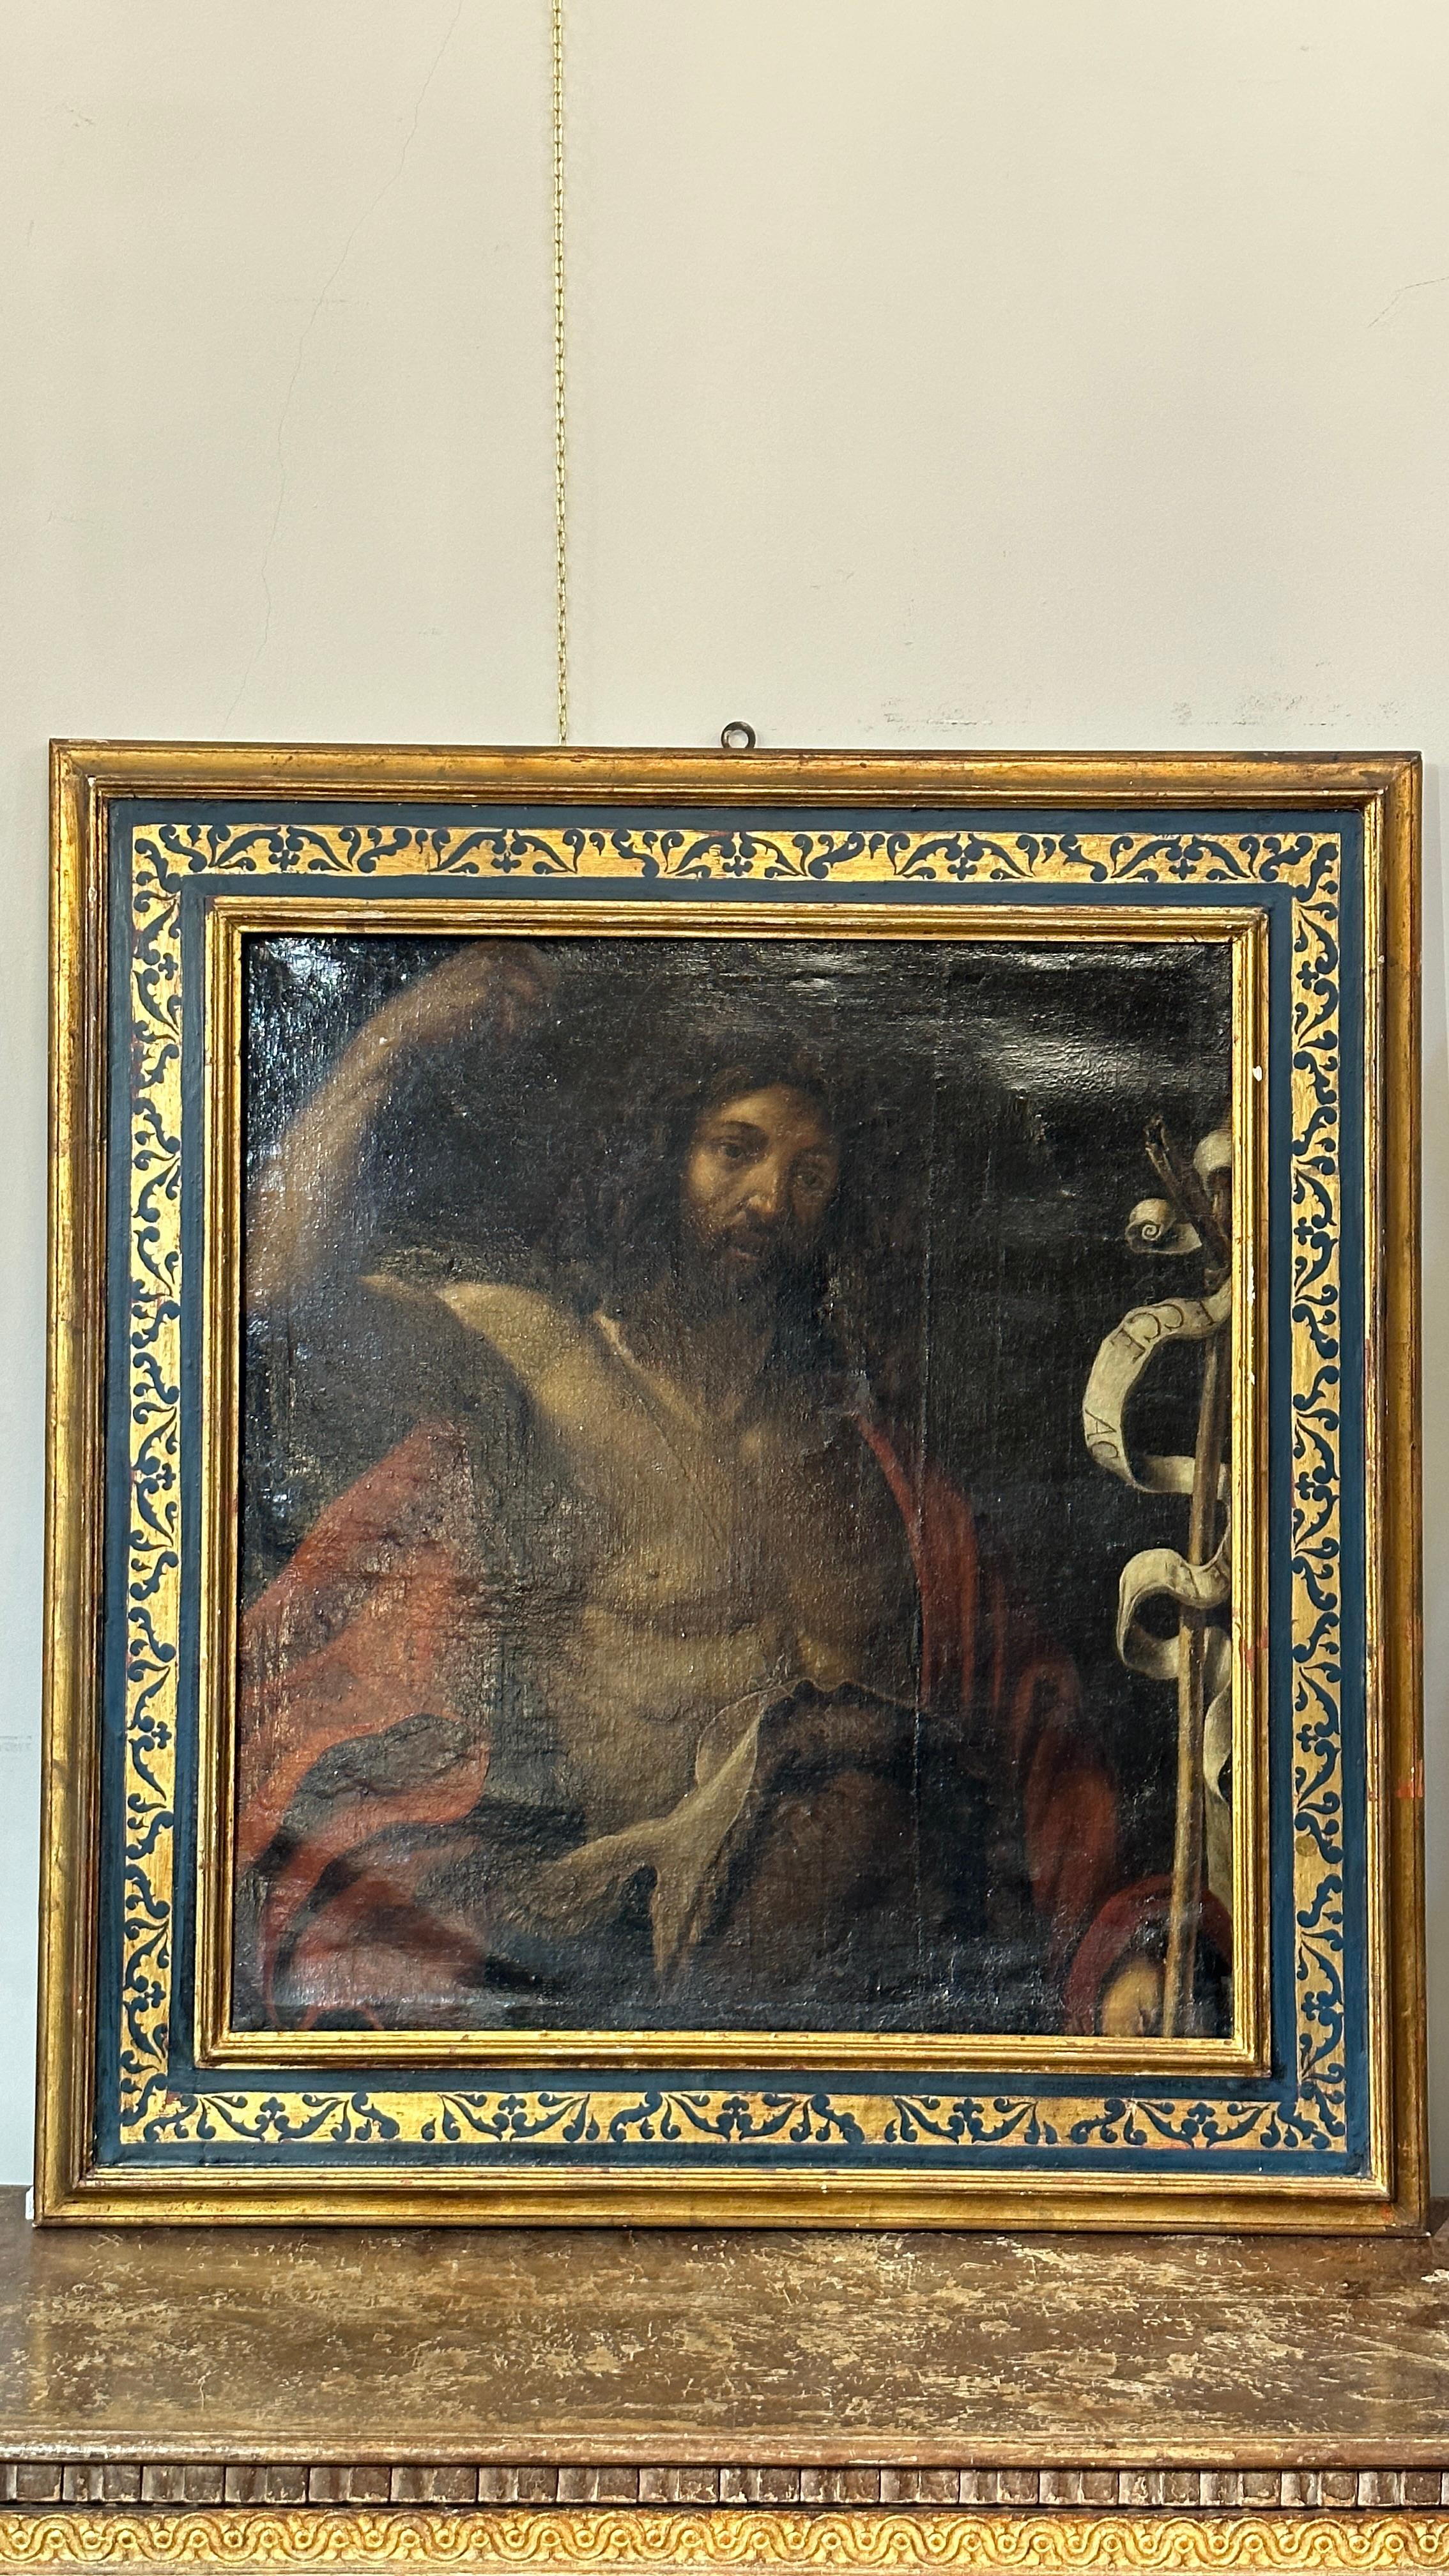 The painting depicts Saint John, in his traditional image, holding a crosier in his hand and covered by a red fleece. The painting is made on first canvas, which was then inserted into a gilded wooden frame. The frame is decorated with painted plant